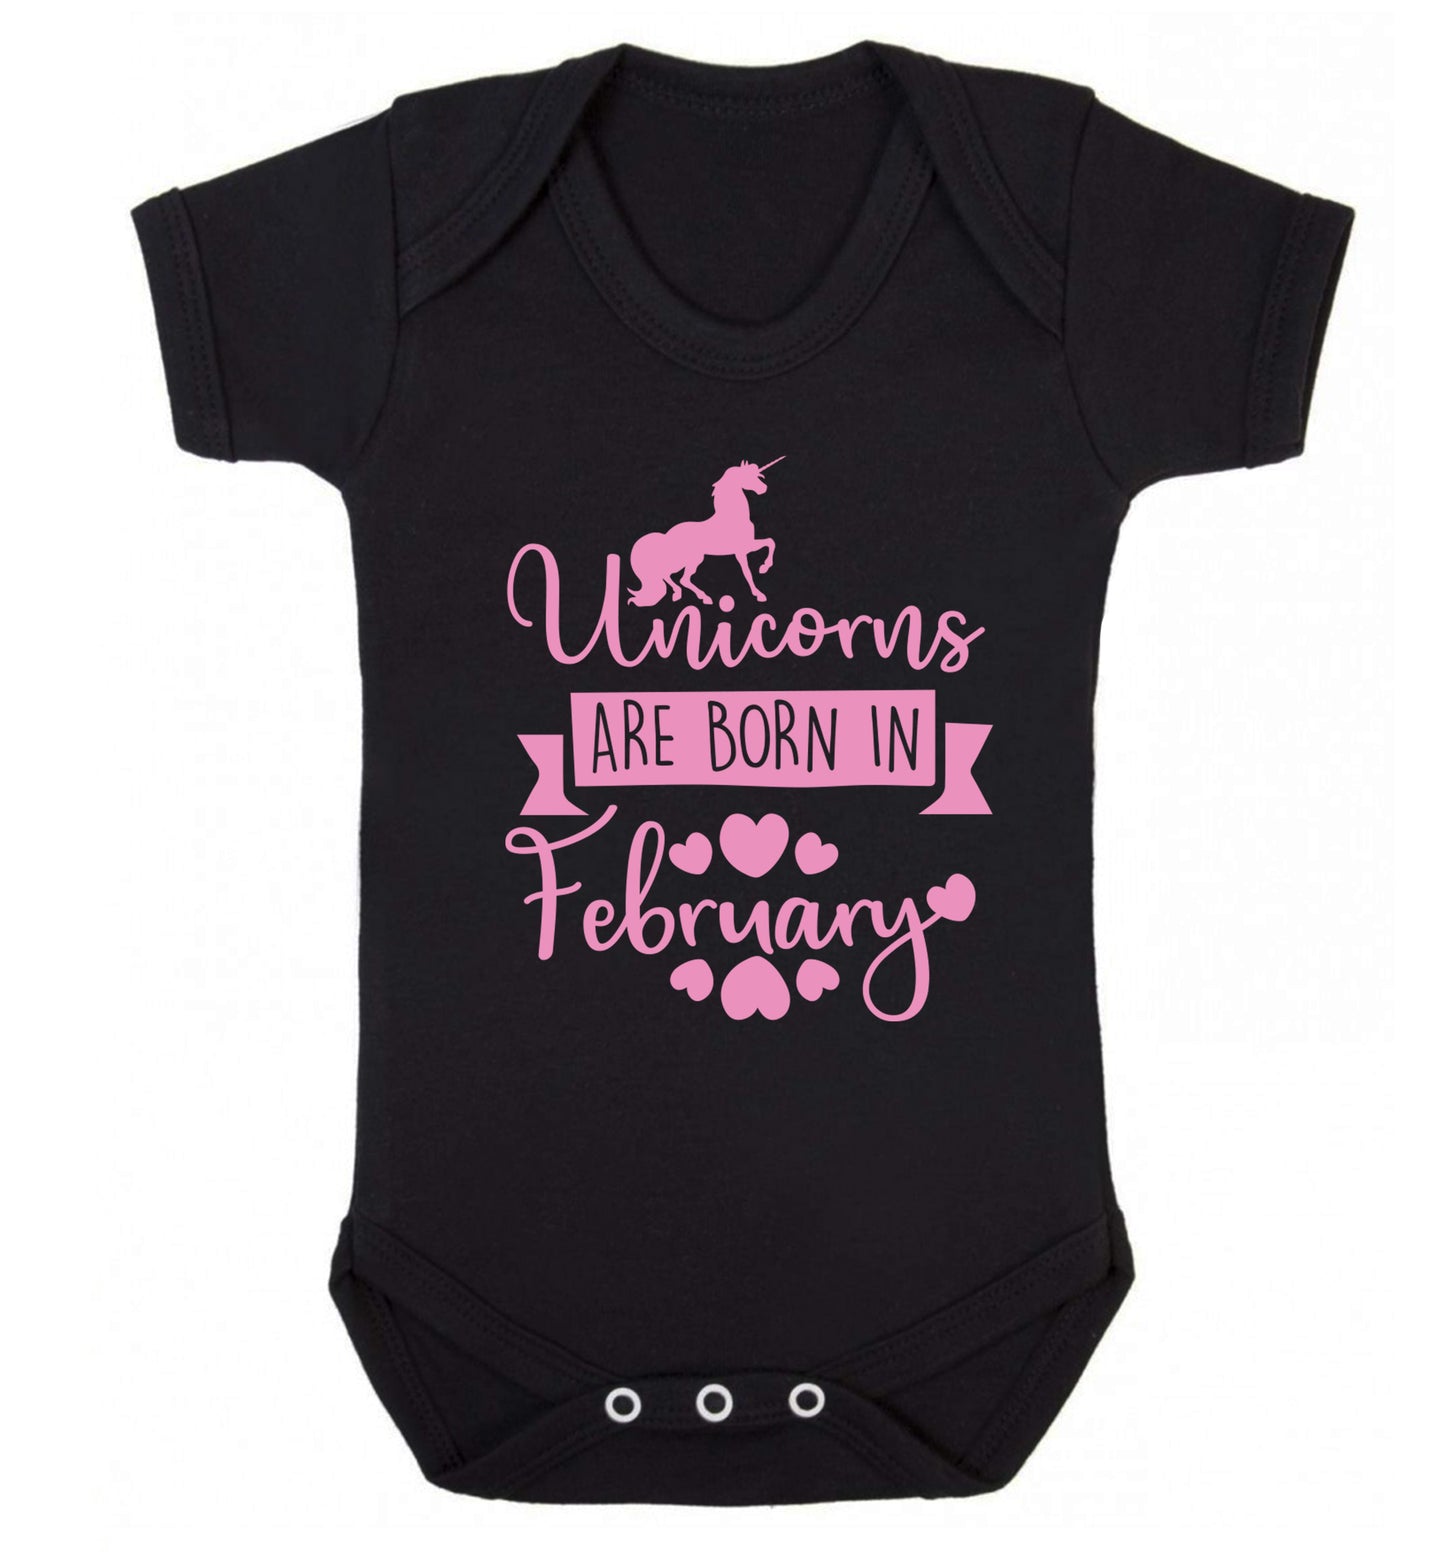 Unicorns are born in February Baby Vest black 18-24 months